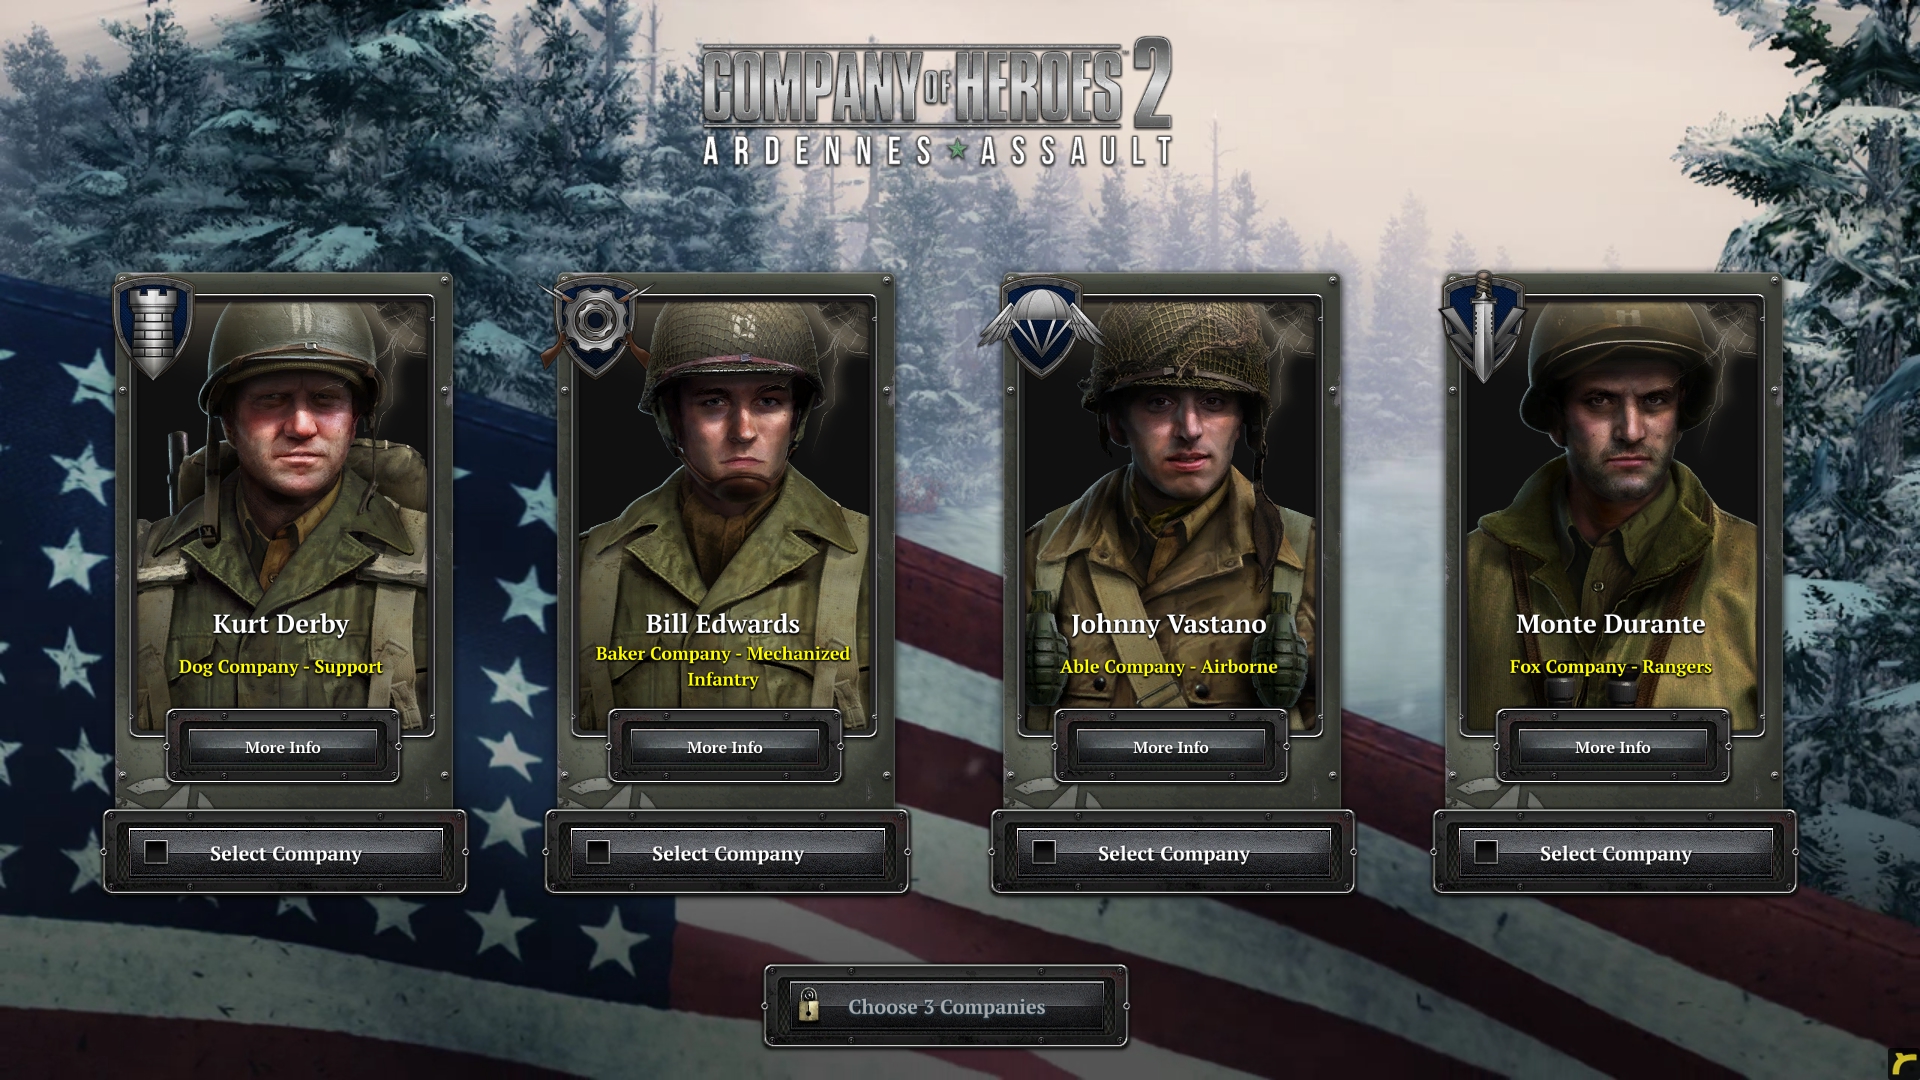 Ӣ2Company Of Heroes 2v3.0.0.9704޸GRIZZLY